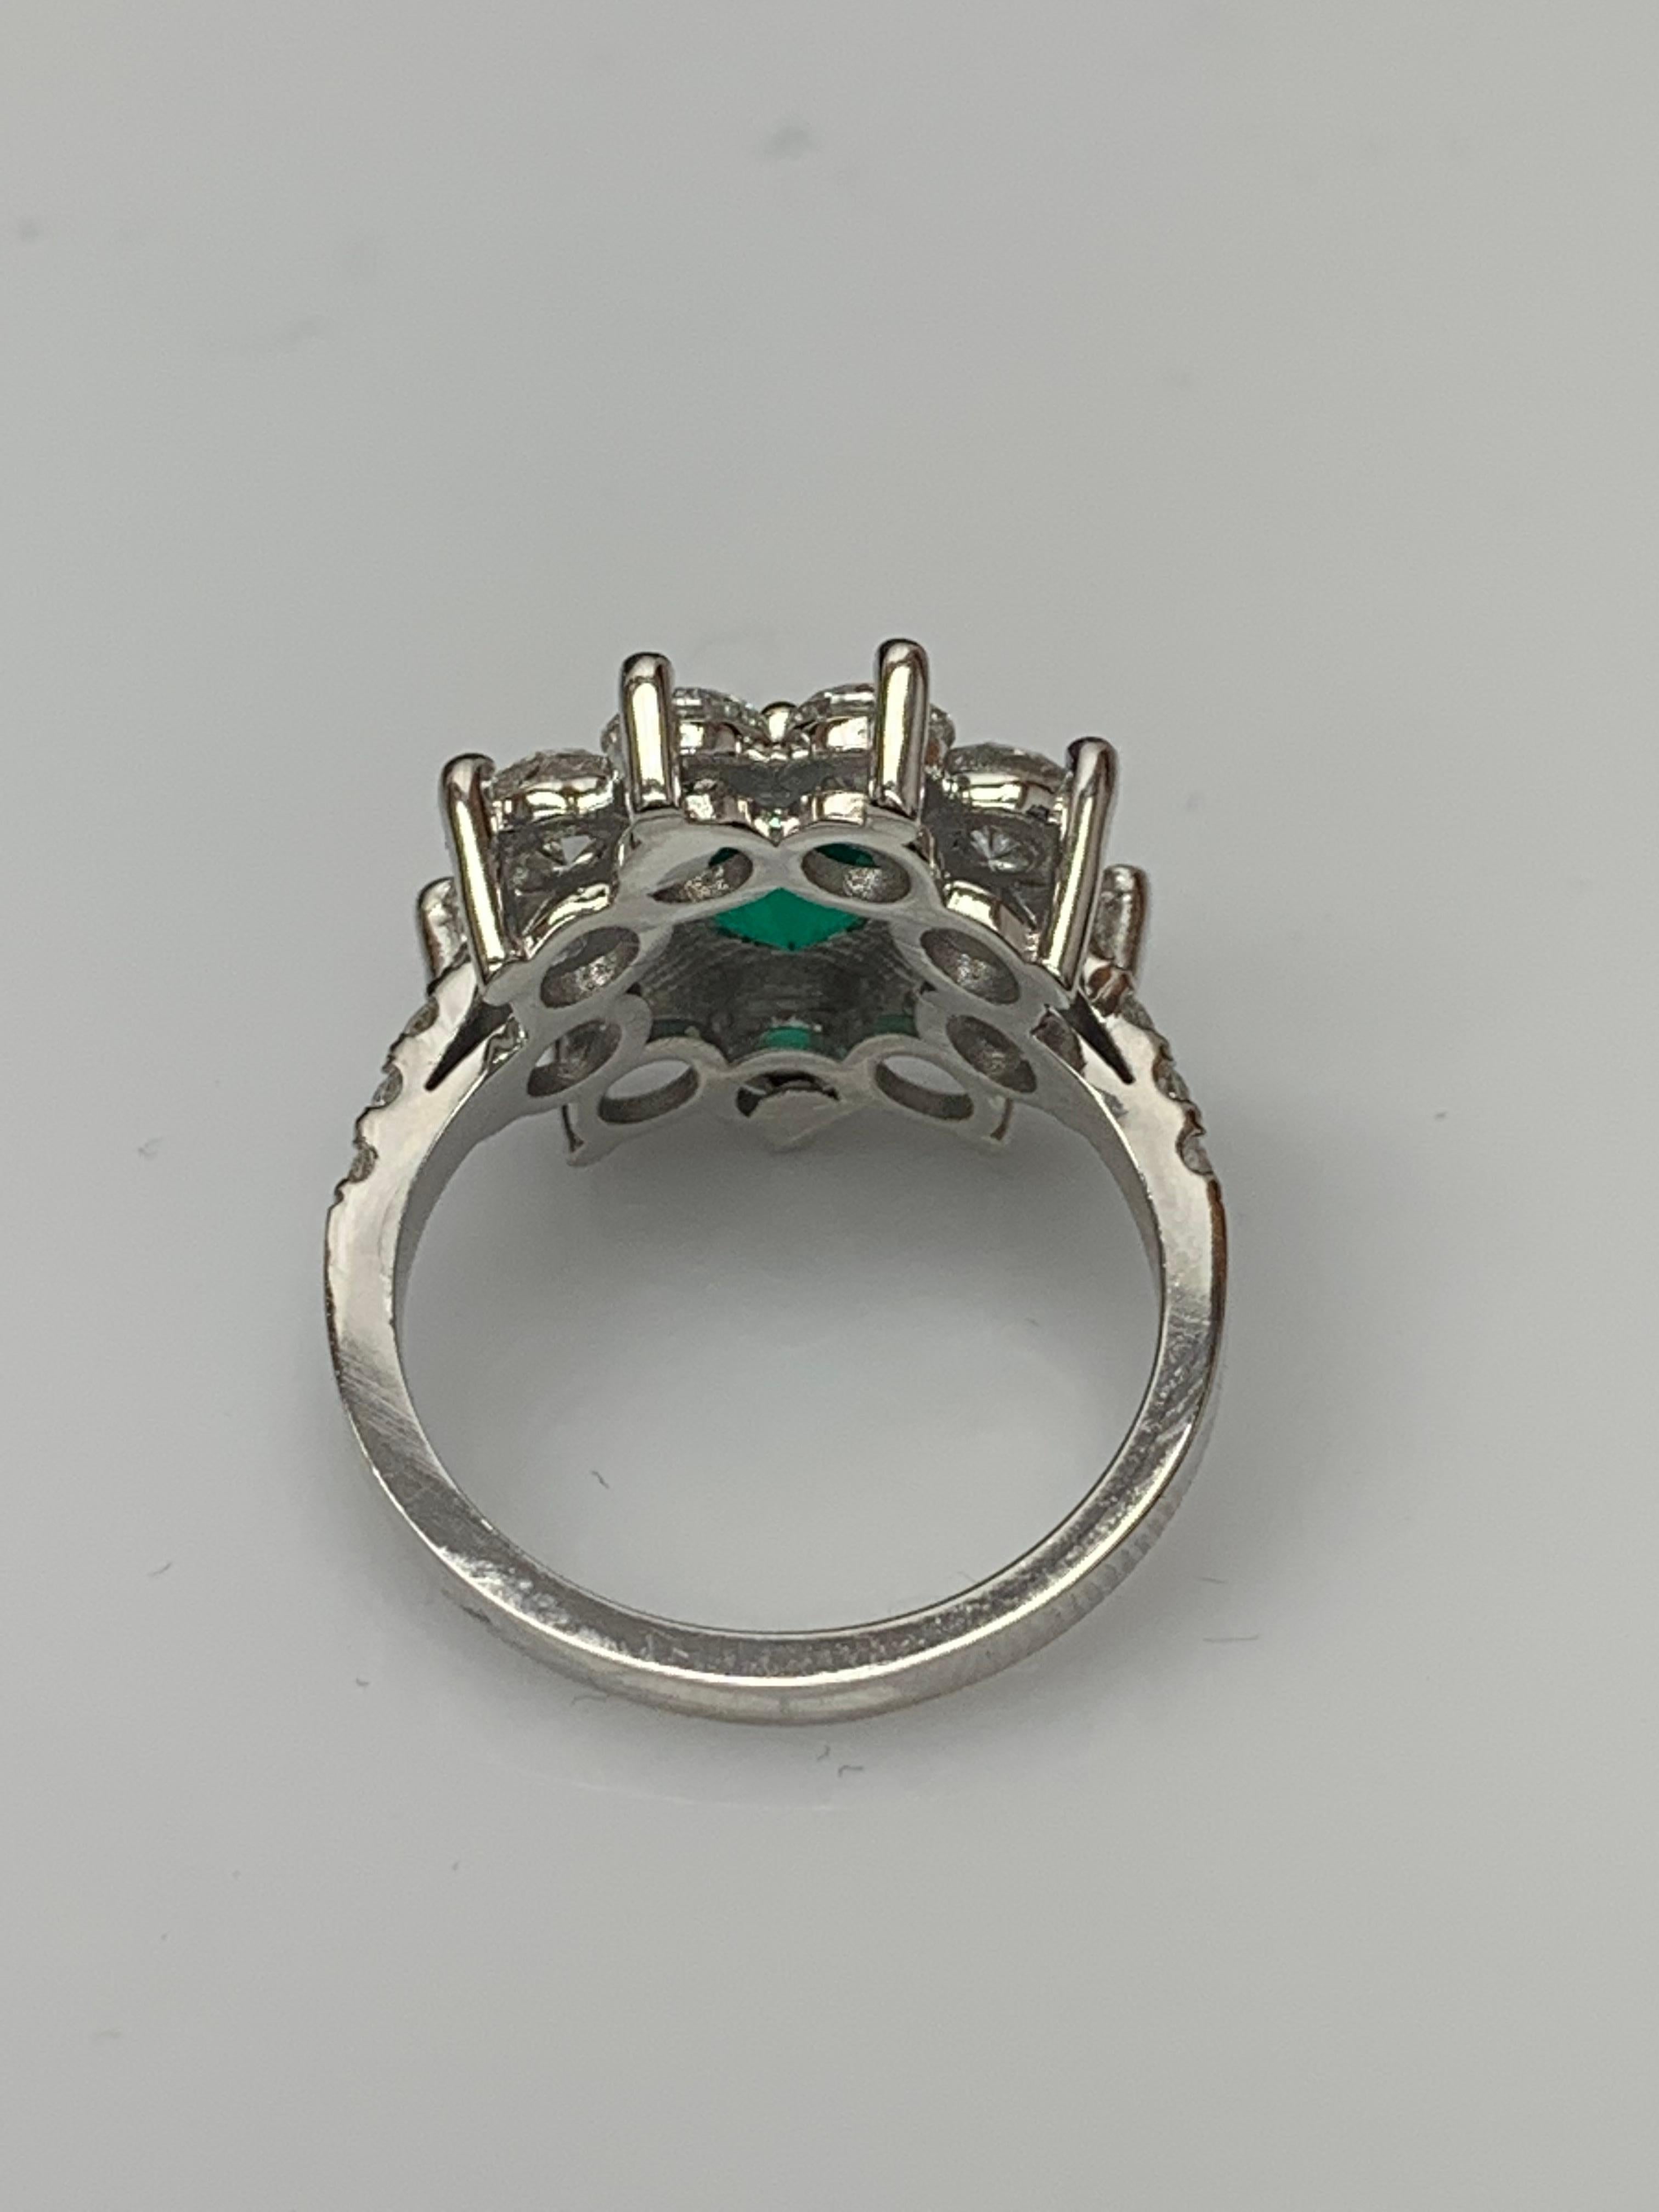 1.18 Carat Brilliant Cut Emerald and Diamond Ring in 14K White Gold For Sale 1